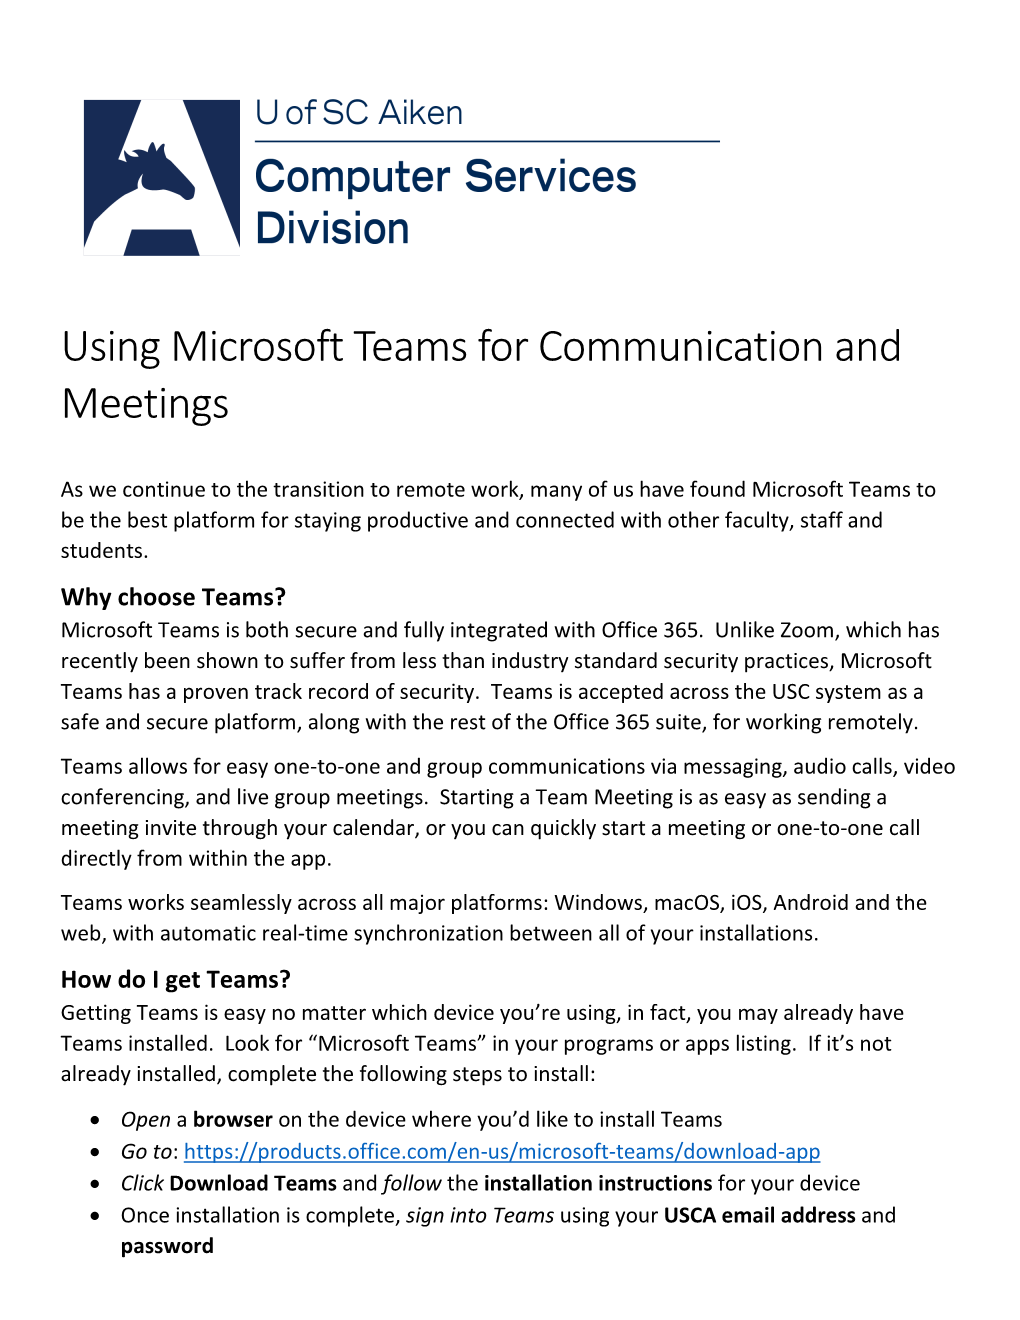 Using Microsoft Teams for Communication and Meetings